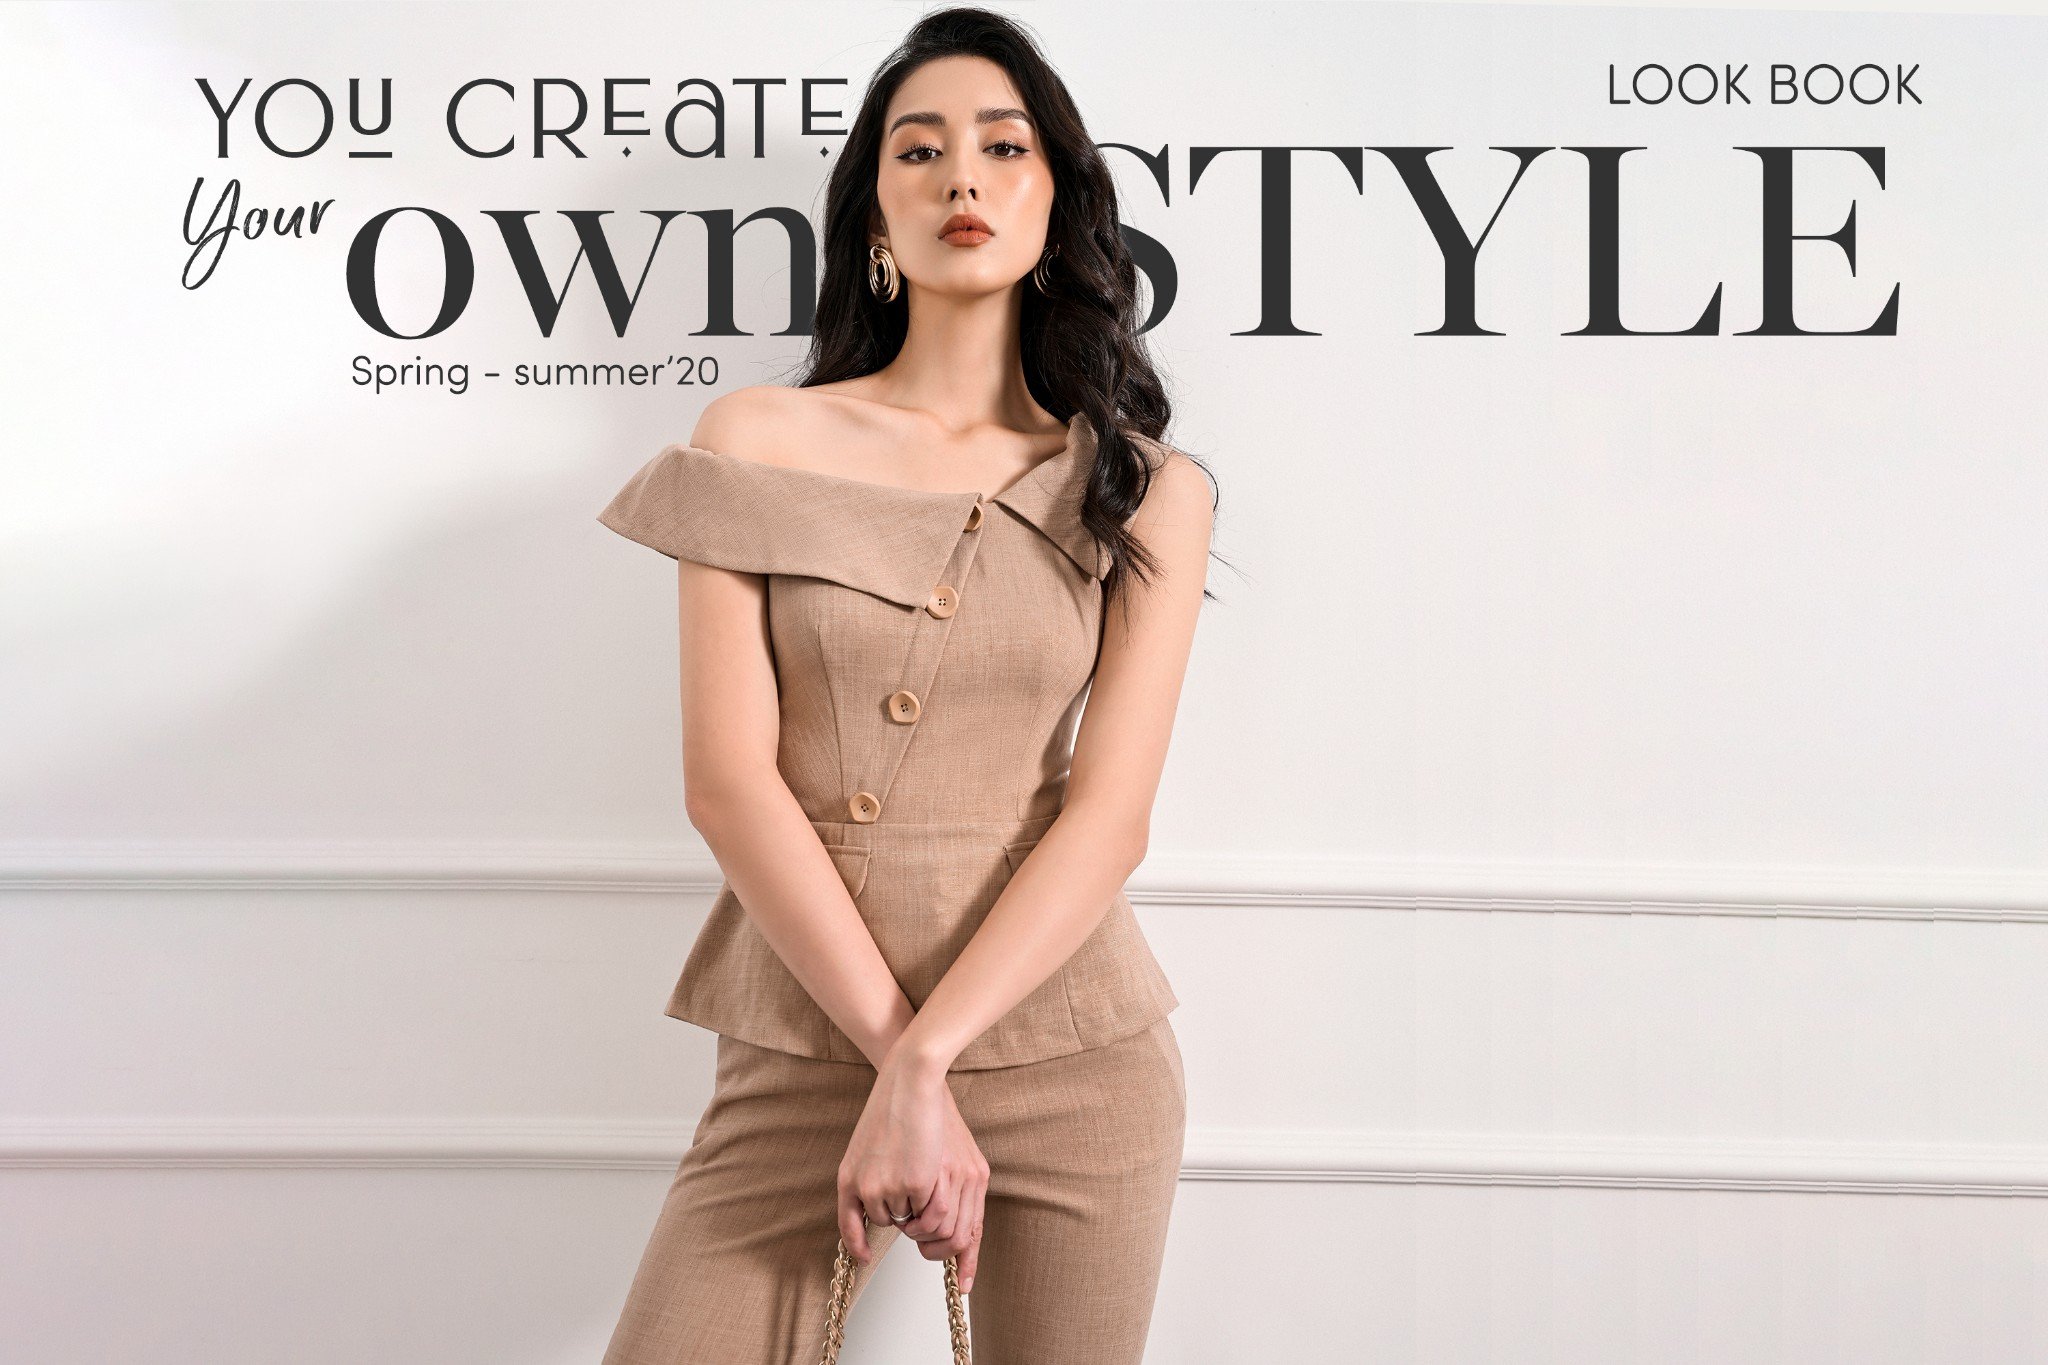 YOU CREATE YOUR OWN STYLE